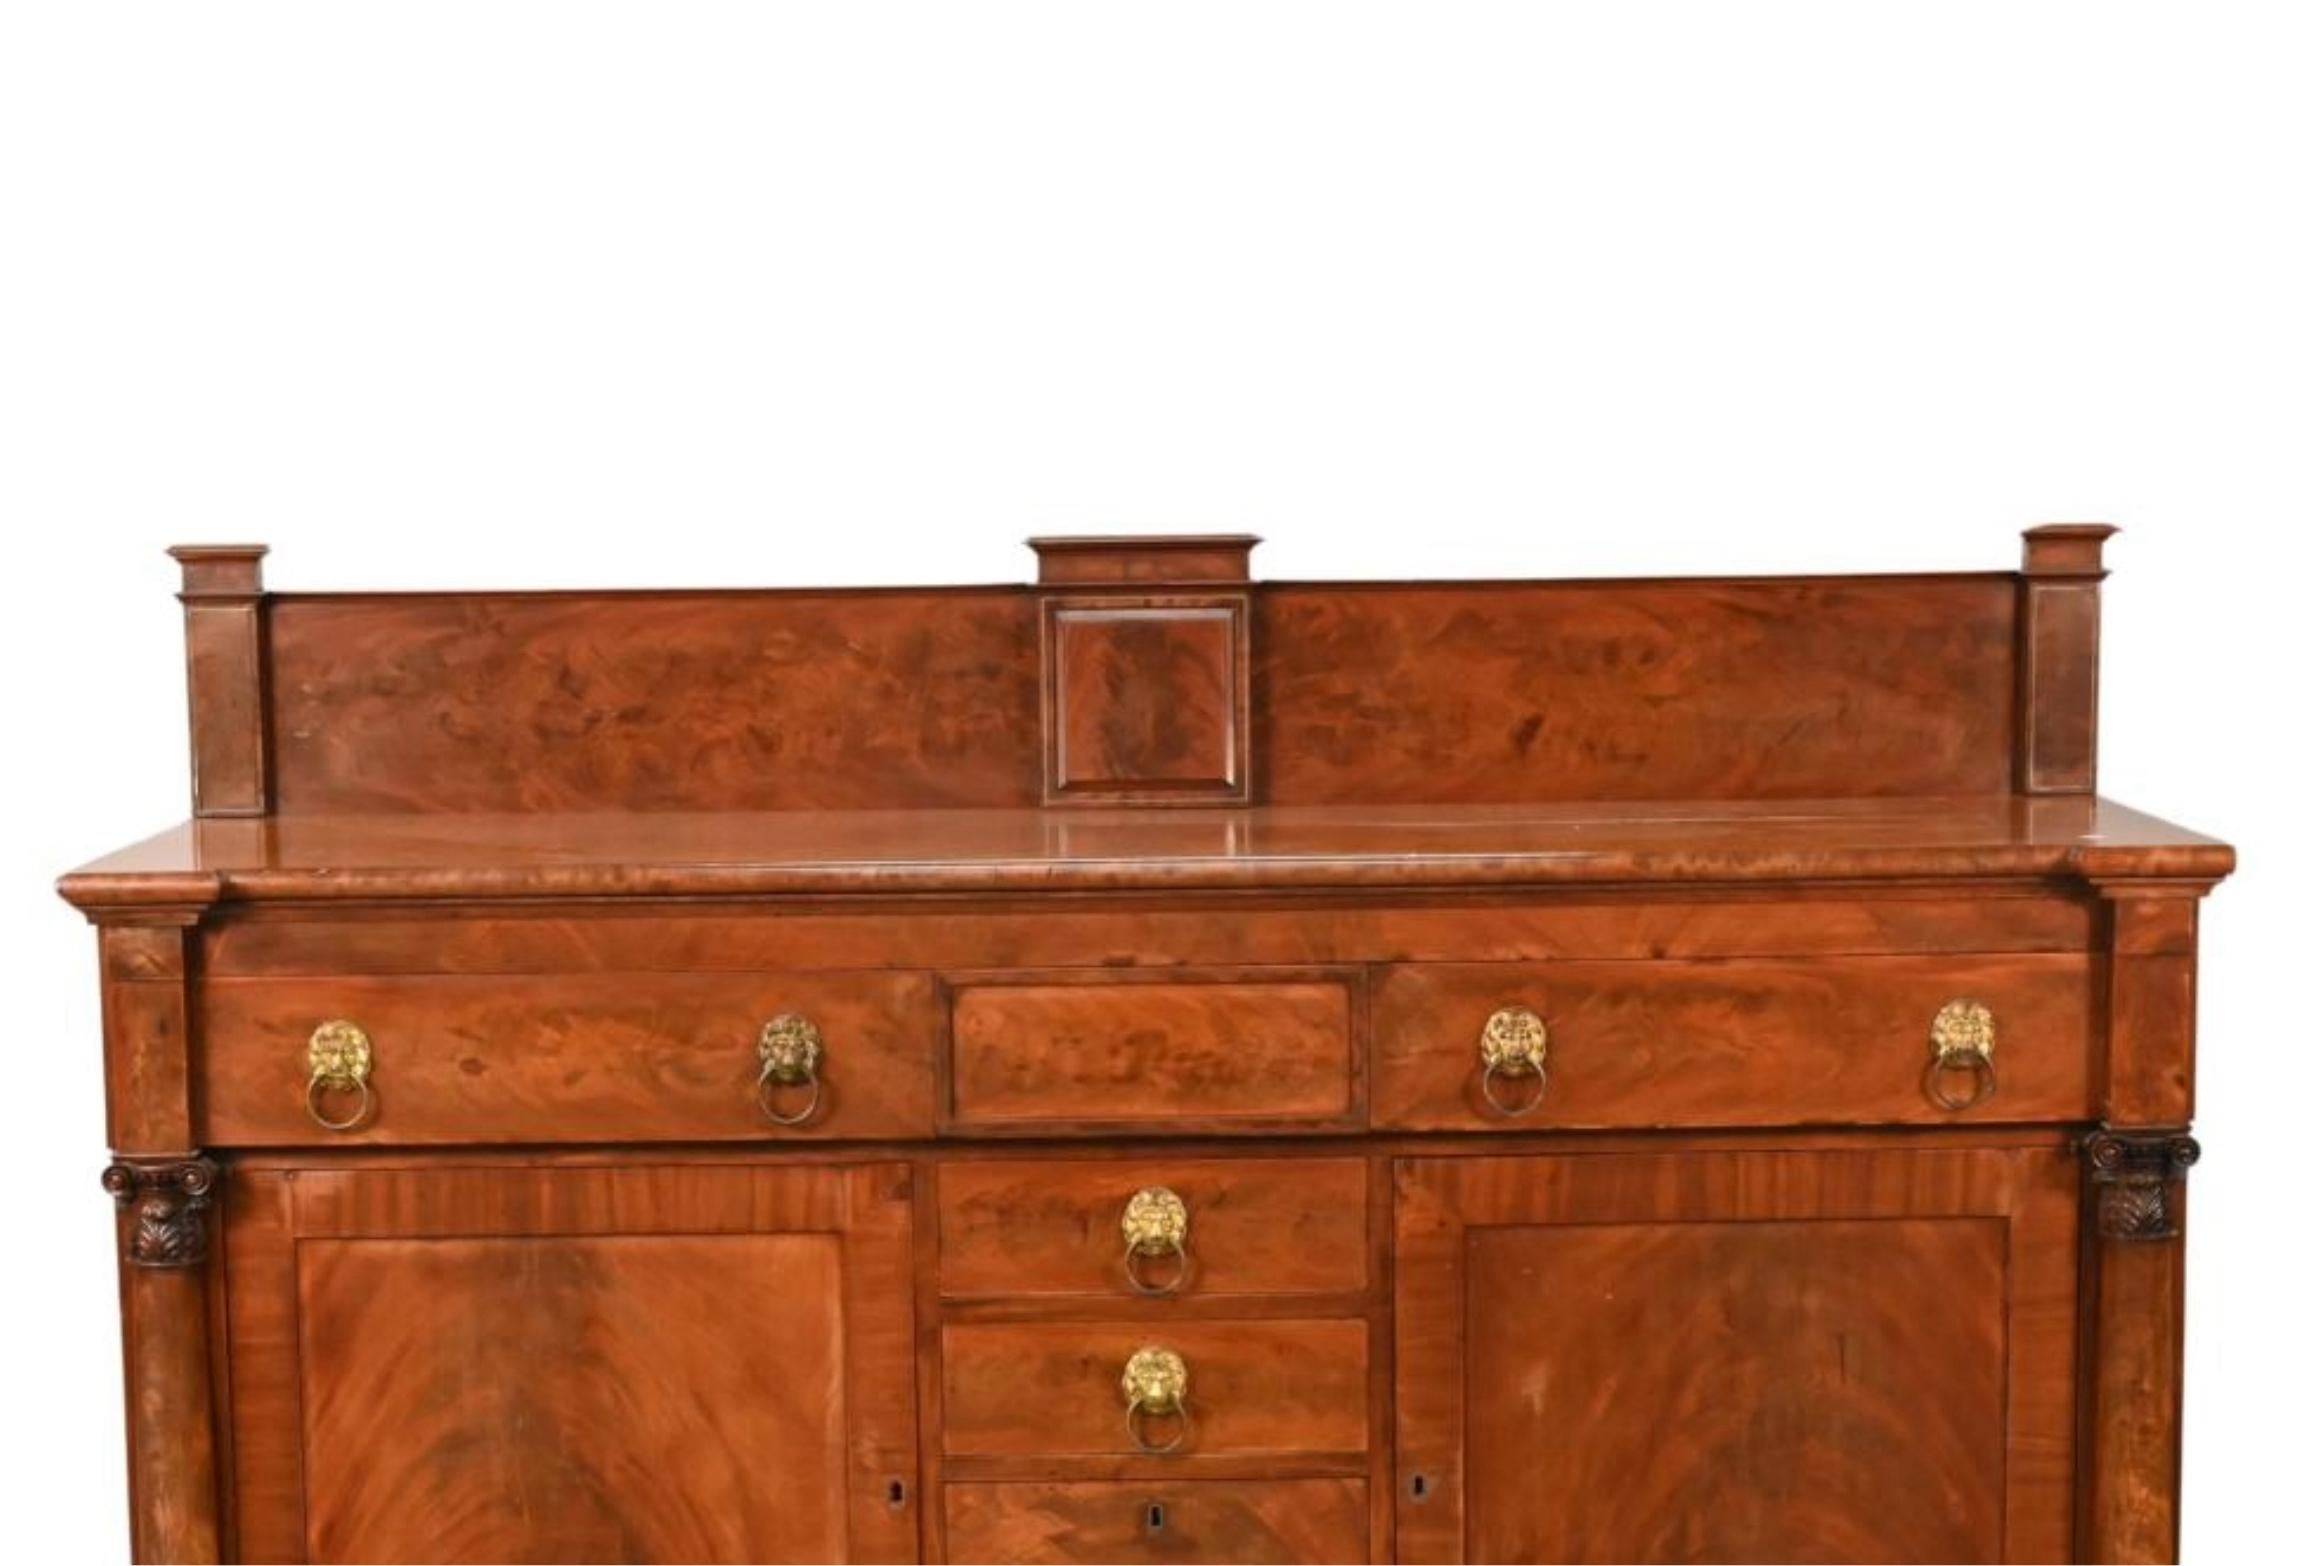 Elevate your dining space with this exquisite Early 19th Century Mahogany Wood Federal Style Sideboard/Credenza with a charming backsplash over a shaped top. Crafted in the distinguished Federal style, this sideboard exudes timeless elegance and